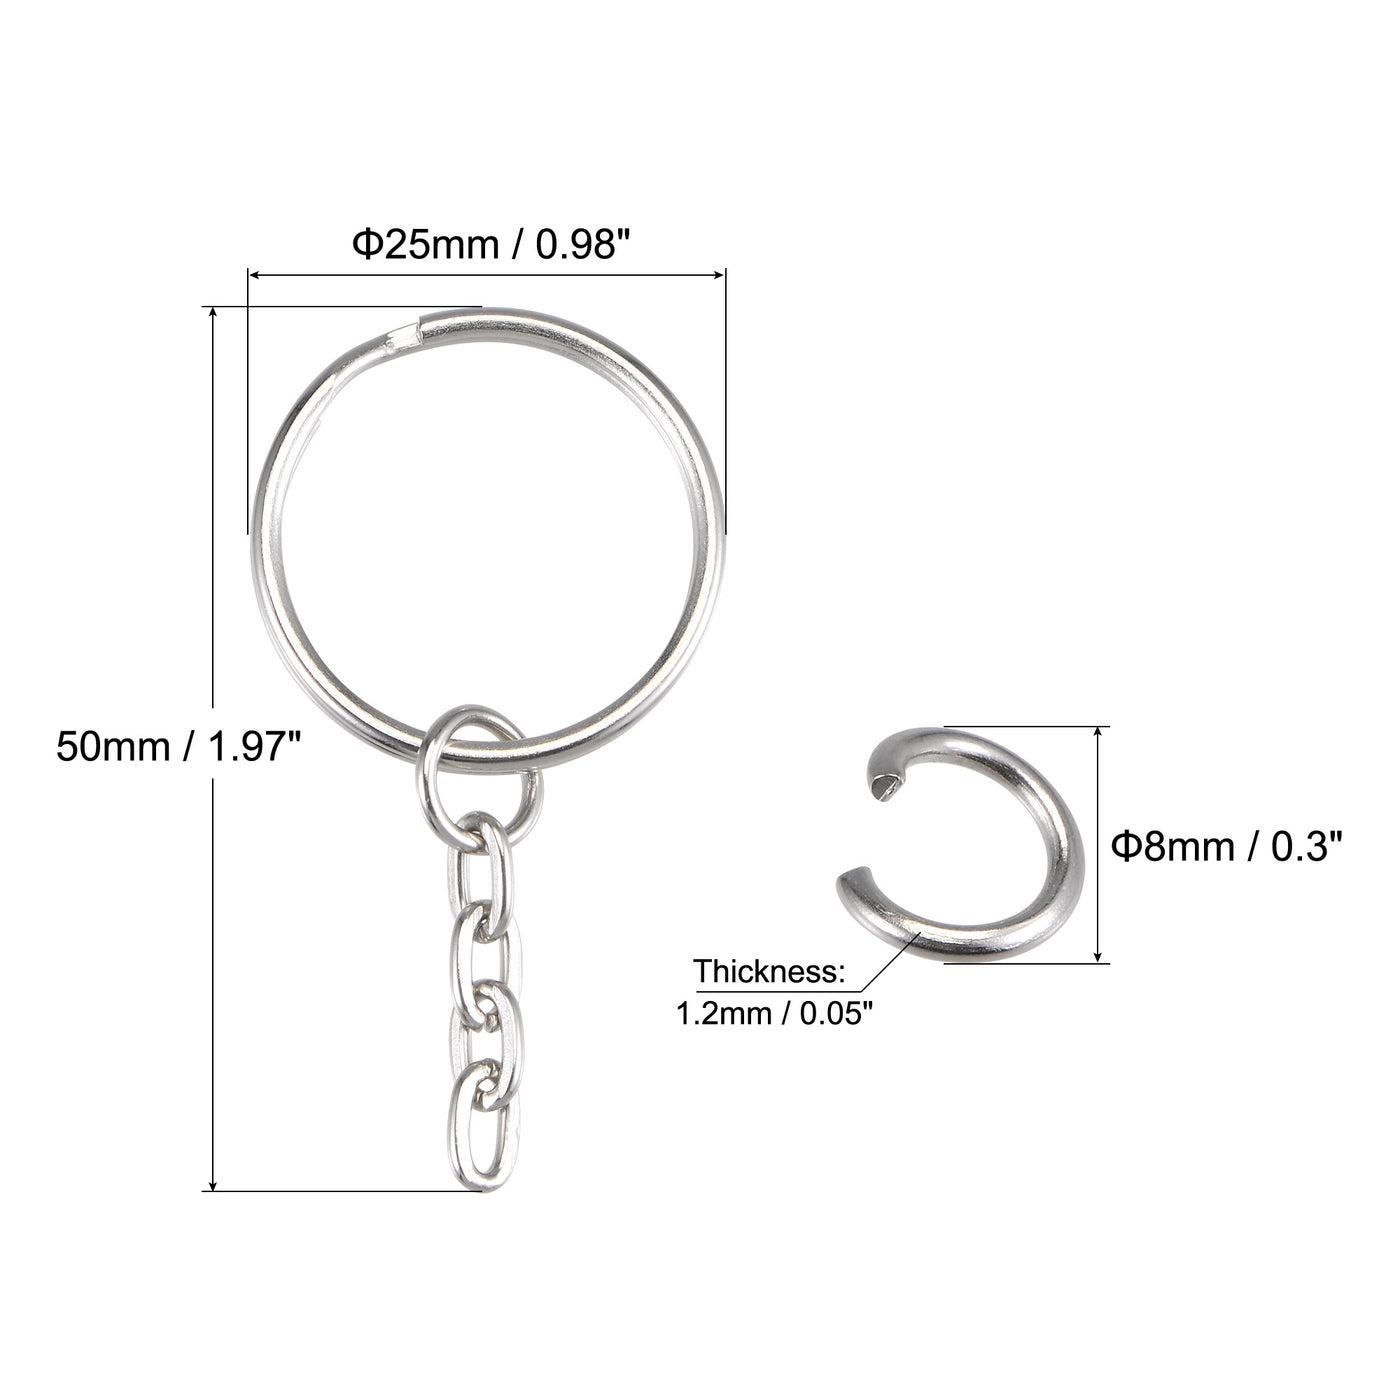 uxcell Uxcell Split Key Ring with 4 Links Chain 1.5x25mm, with 8mm Open Jump Ring Connector for Lanyard Zipper Handbag Art Craft, Nickel Plated Iron, Pack of 20